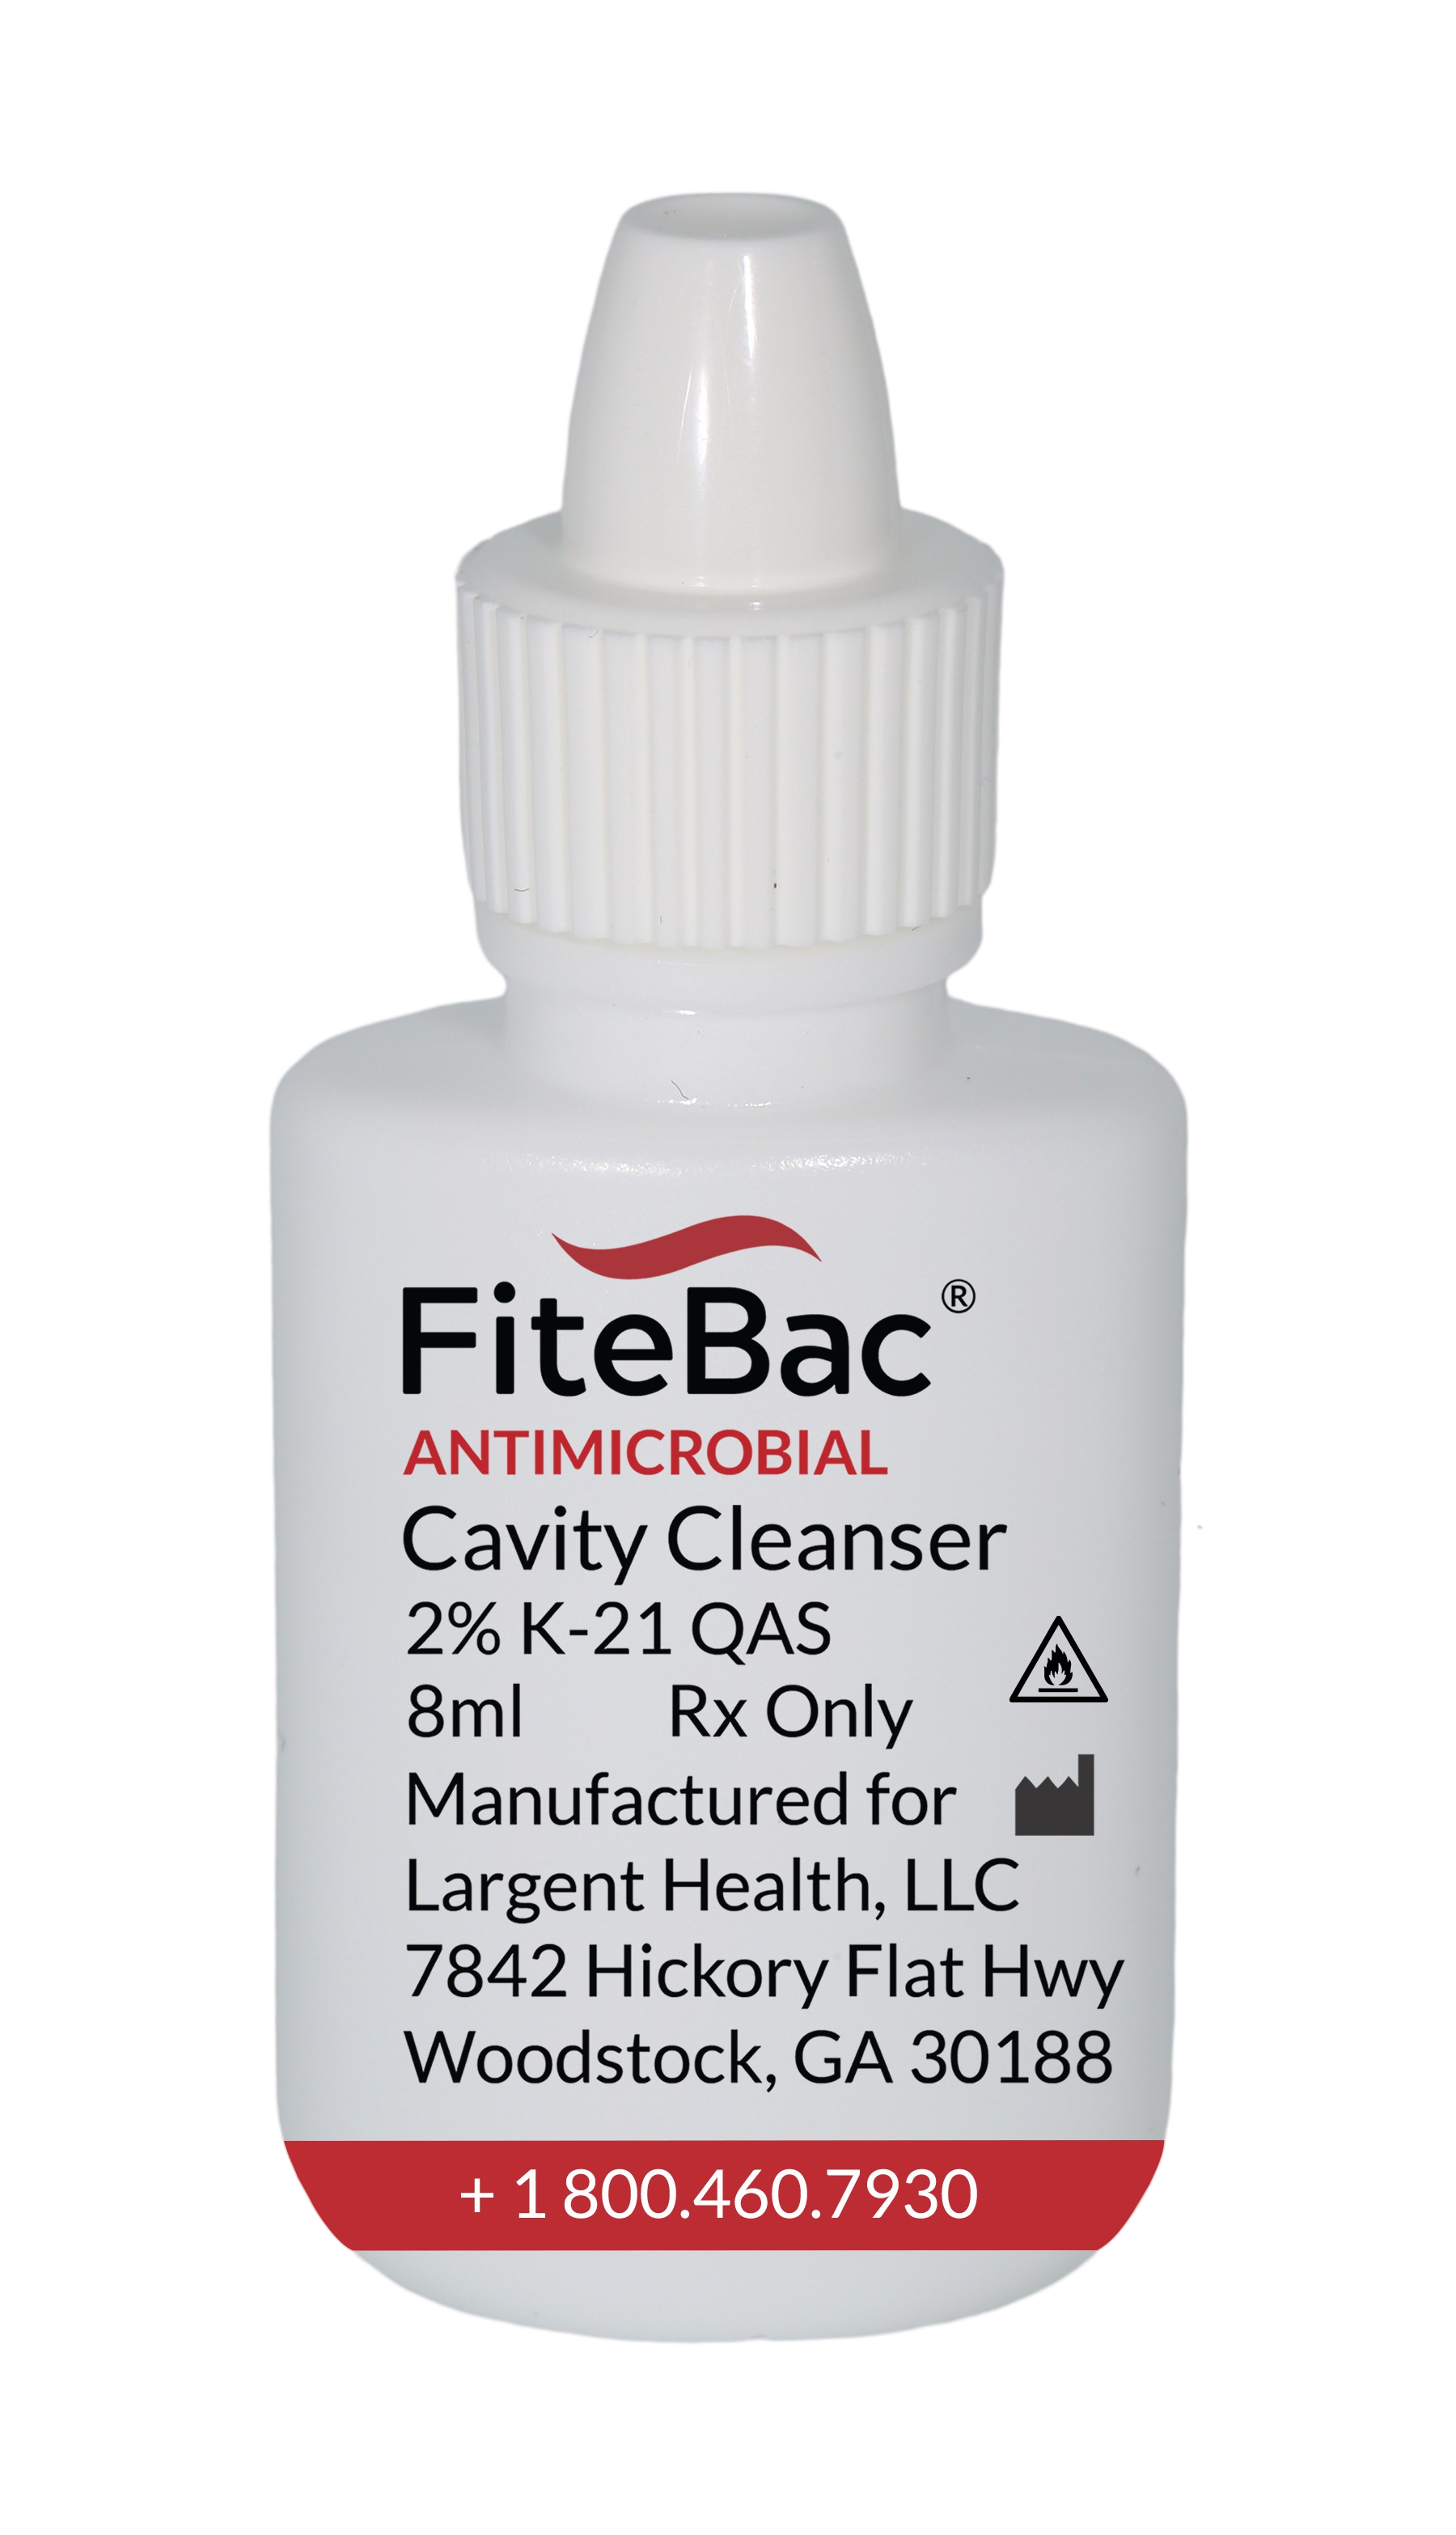 FiteBac antimicrobial cavity cleanser